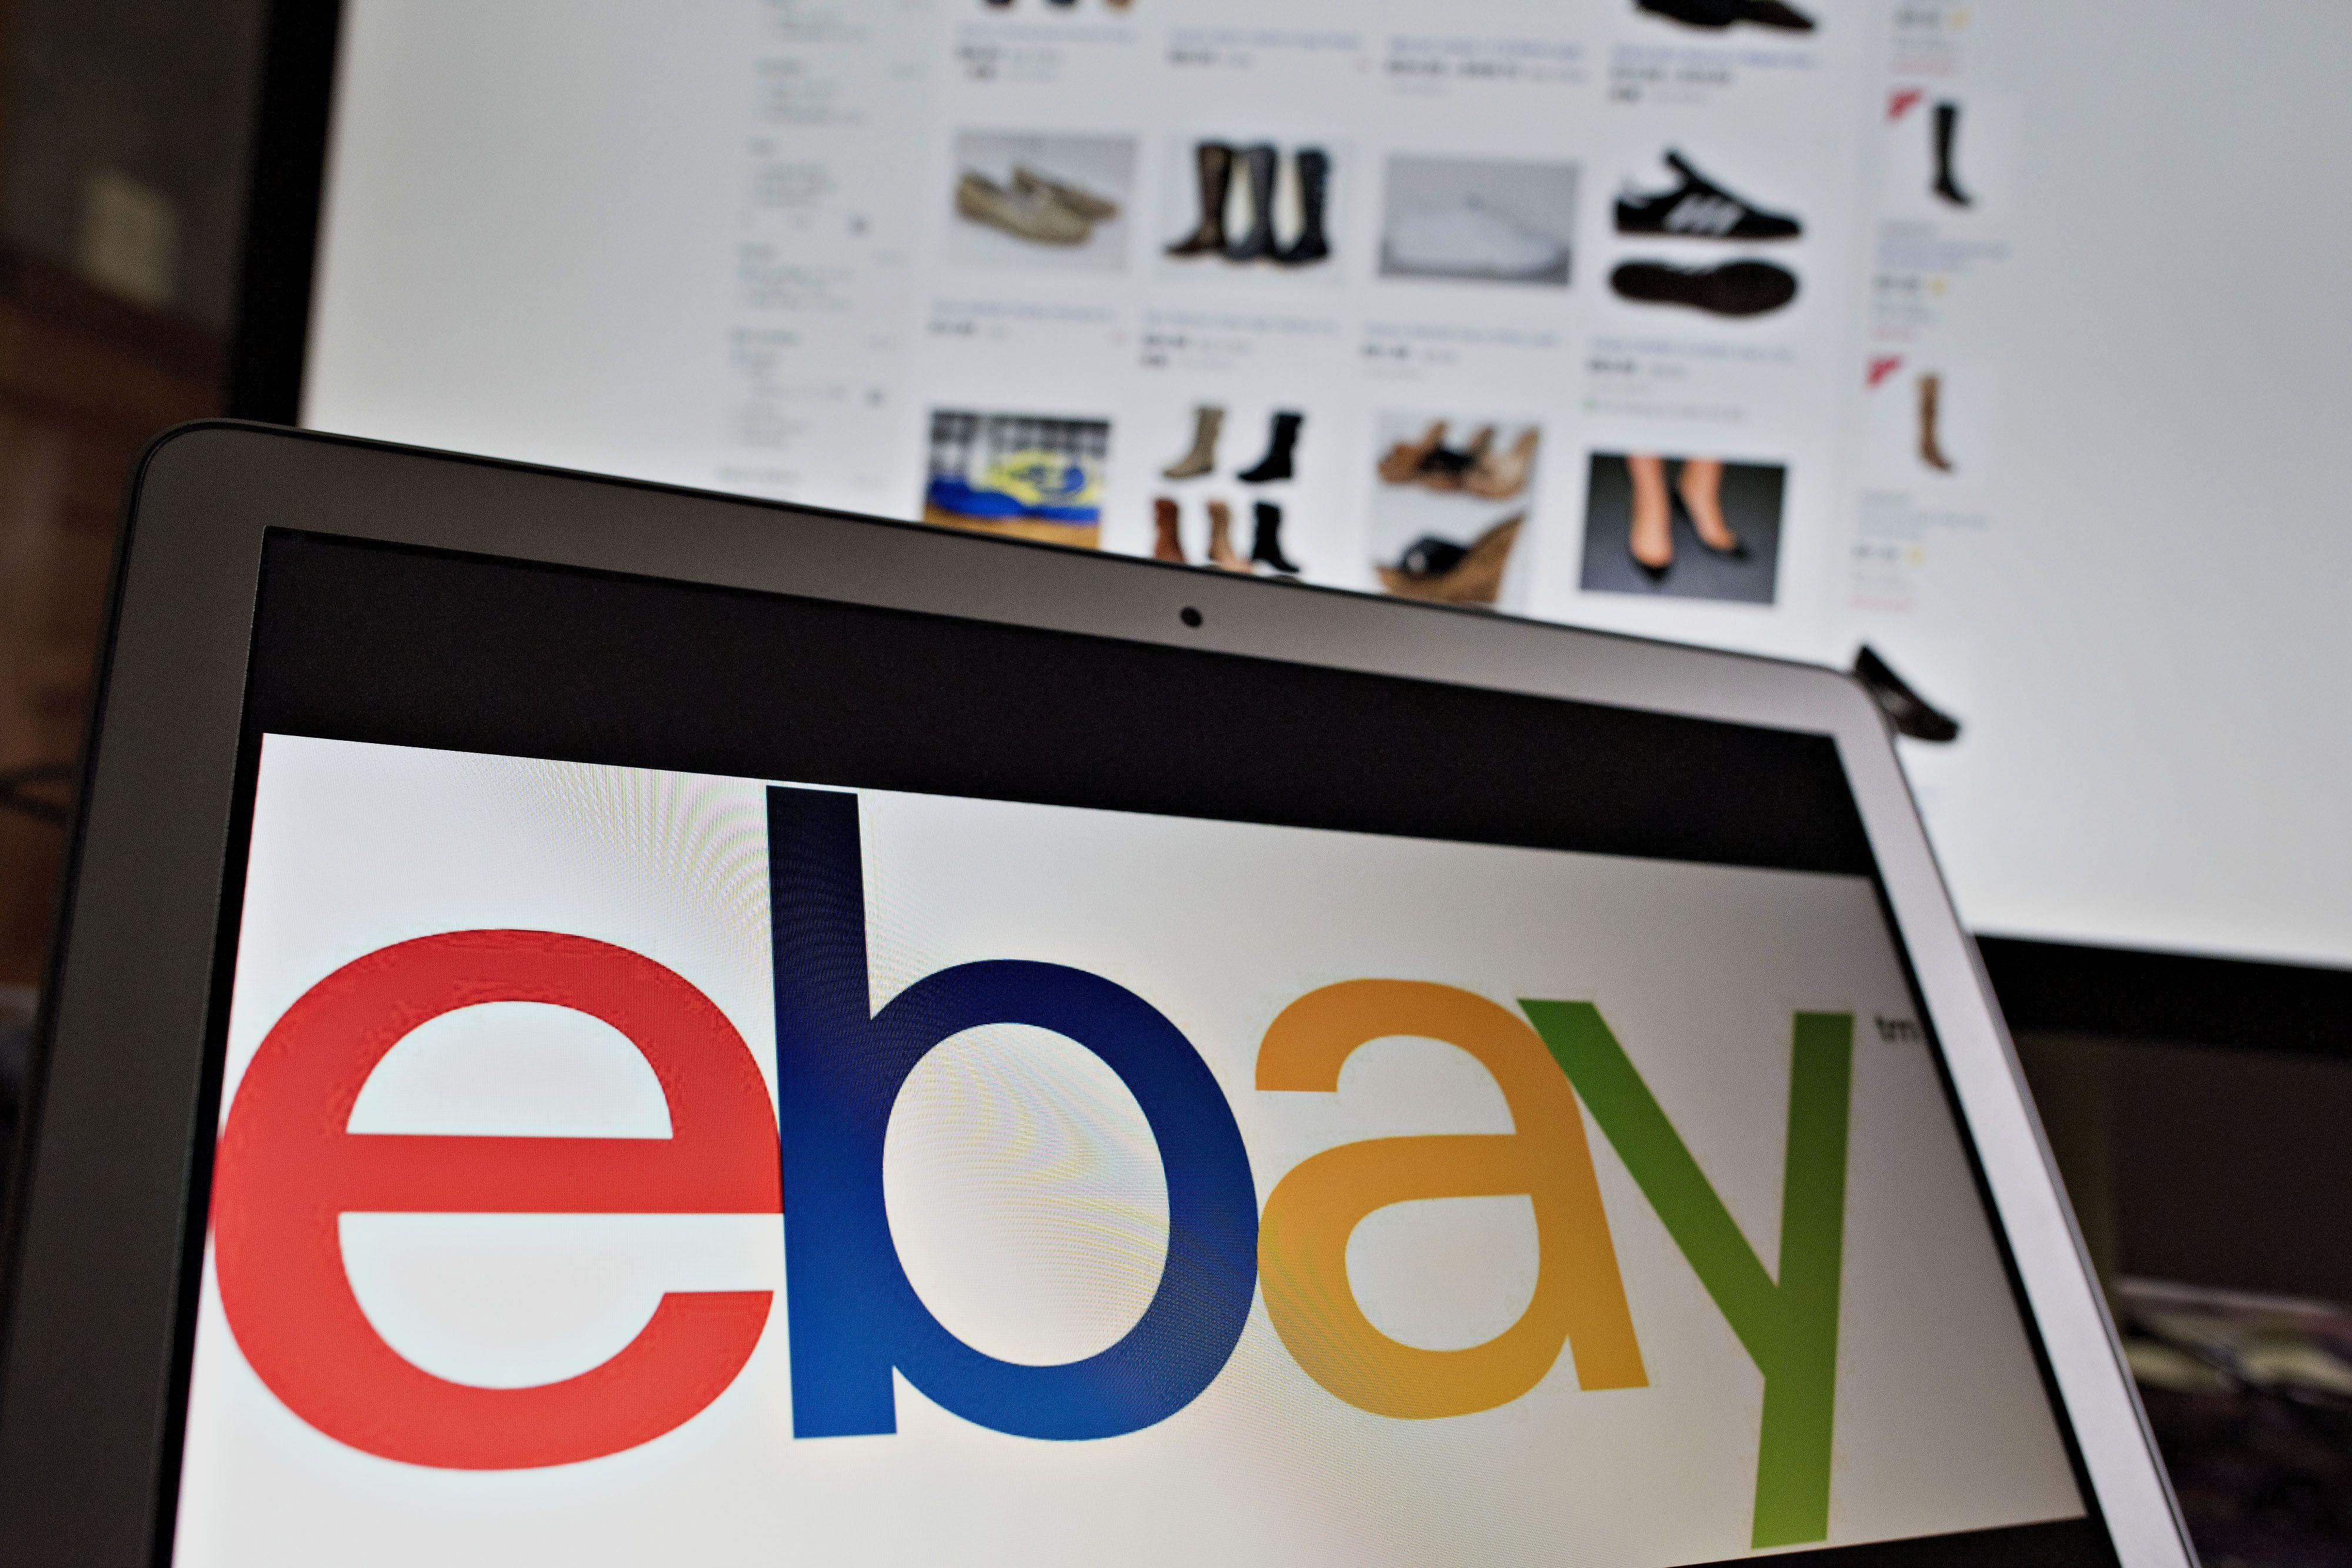 eBay Items with Logo - eBay: Using Mobile App Can Help Users Sell Items | Time